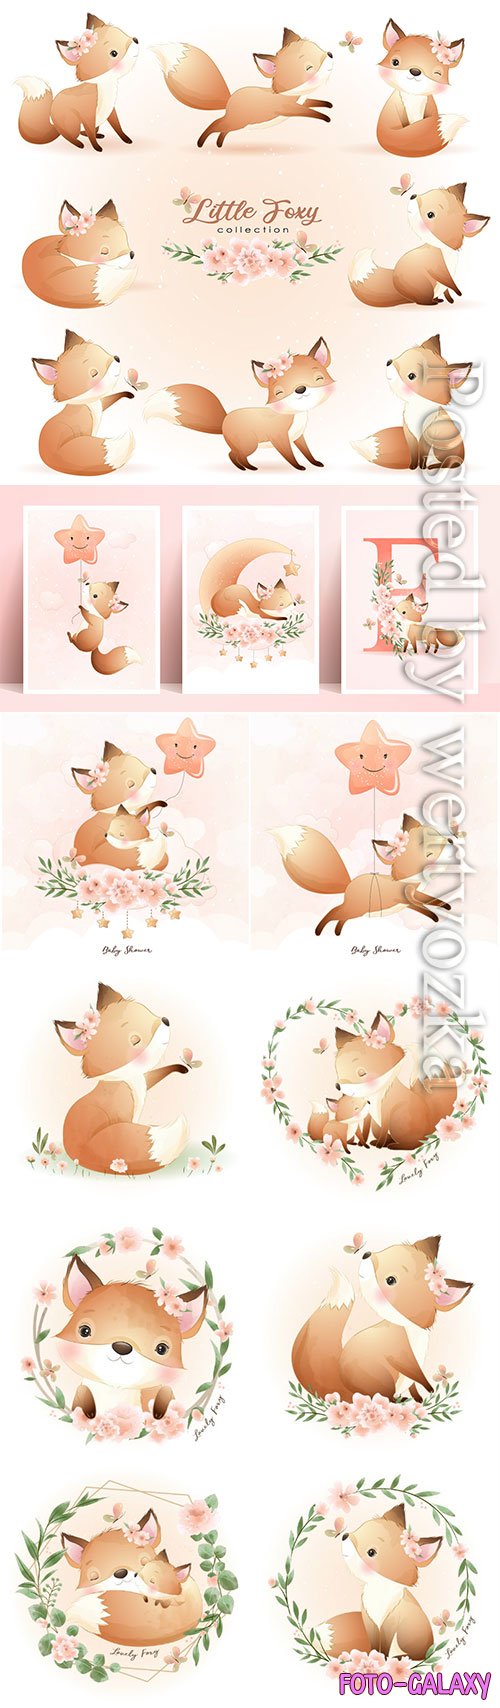 Cute doodle foxy poses with floral illustration premium vector